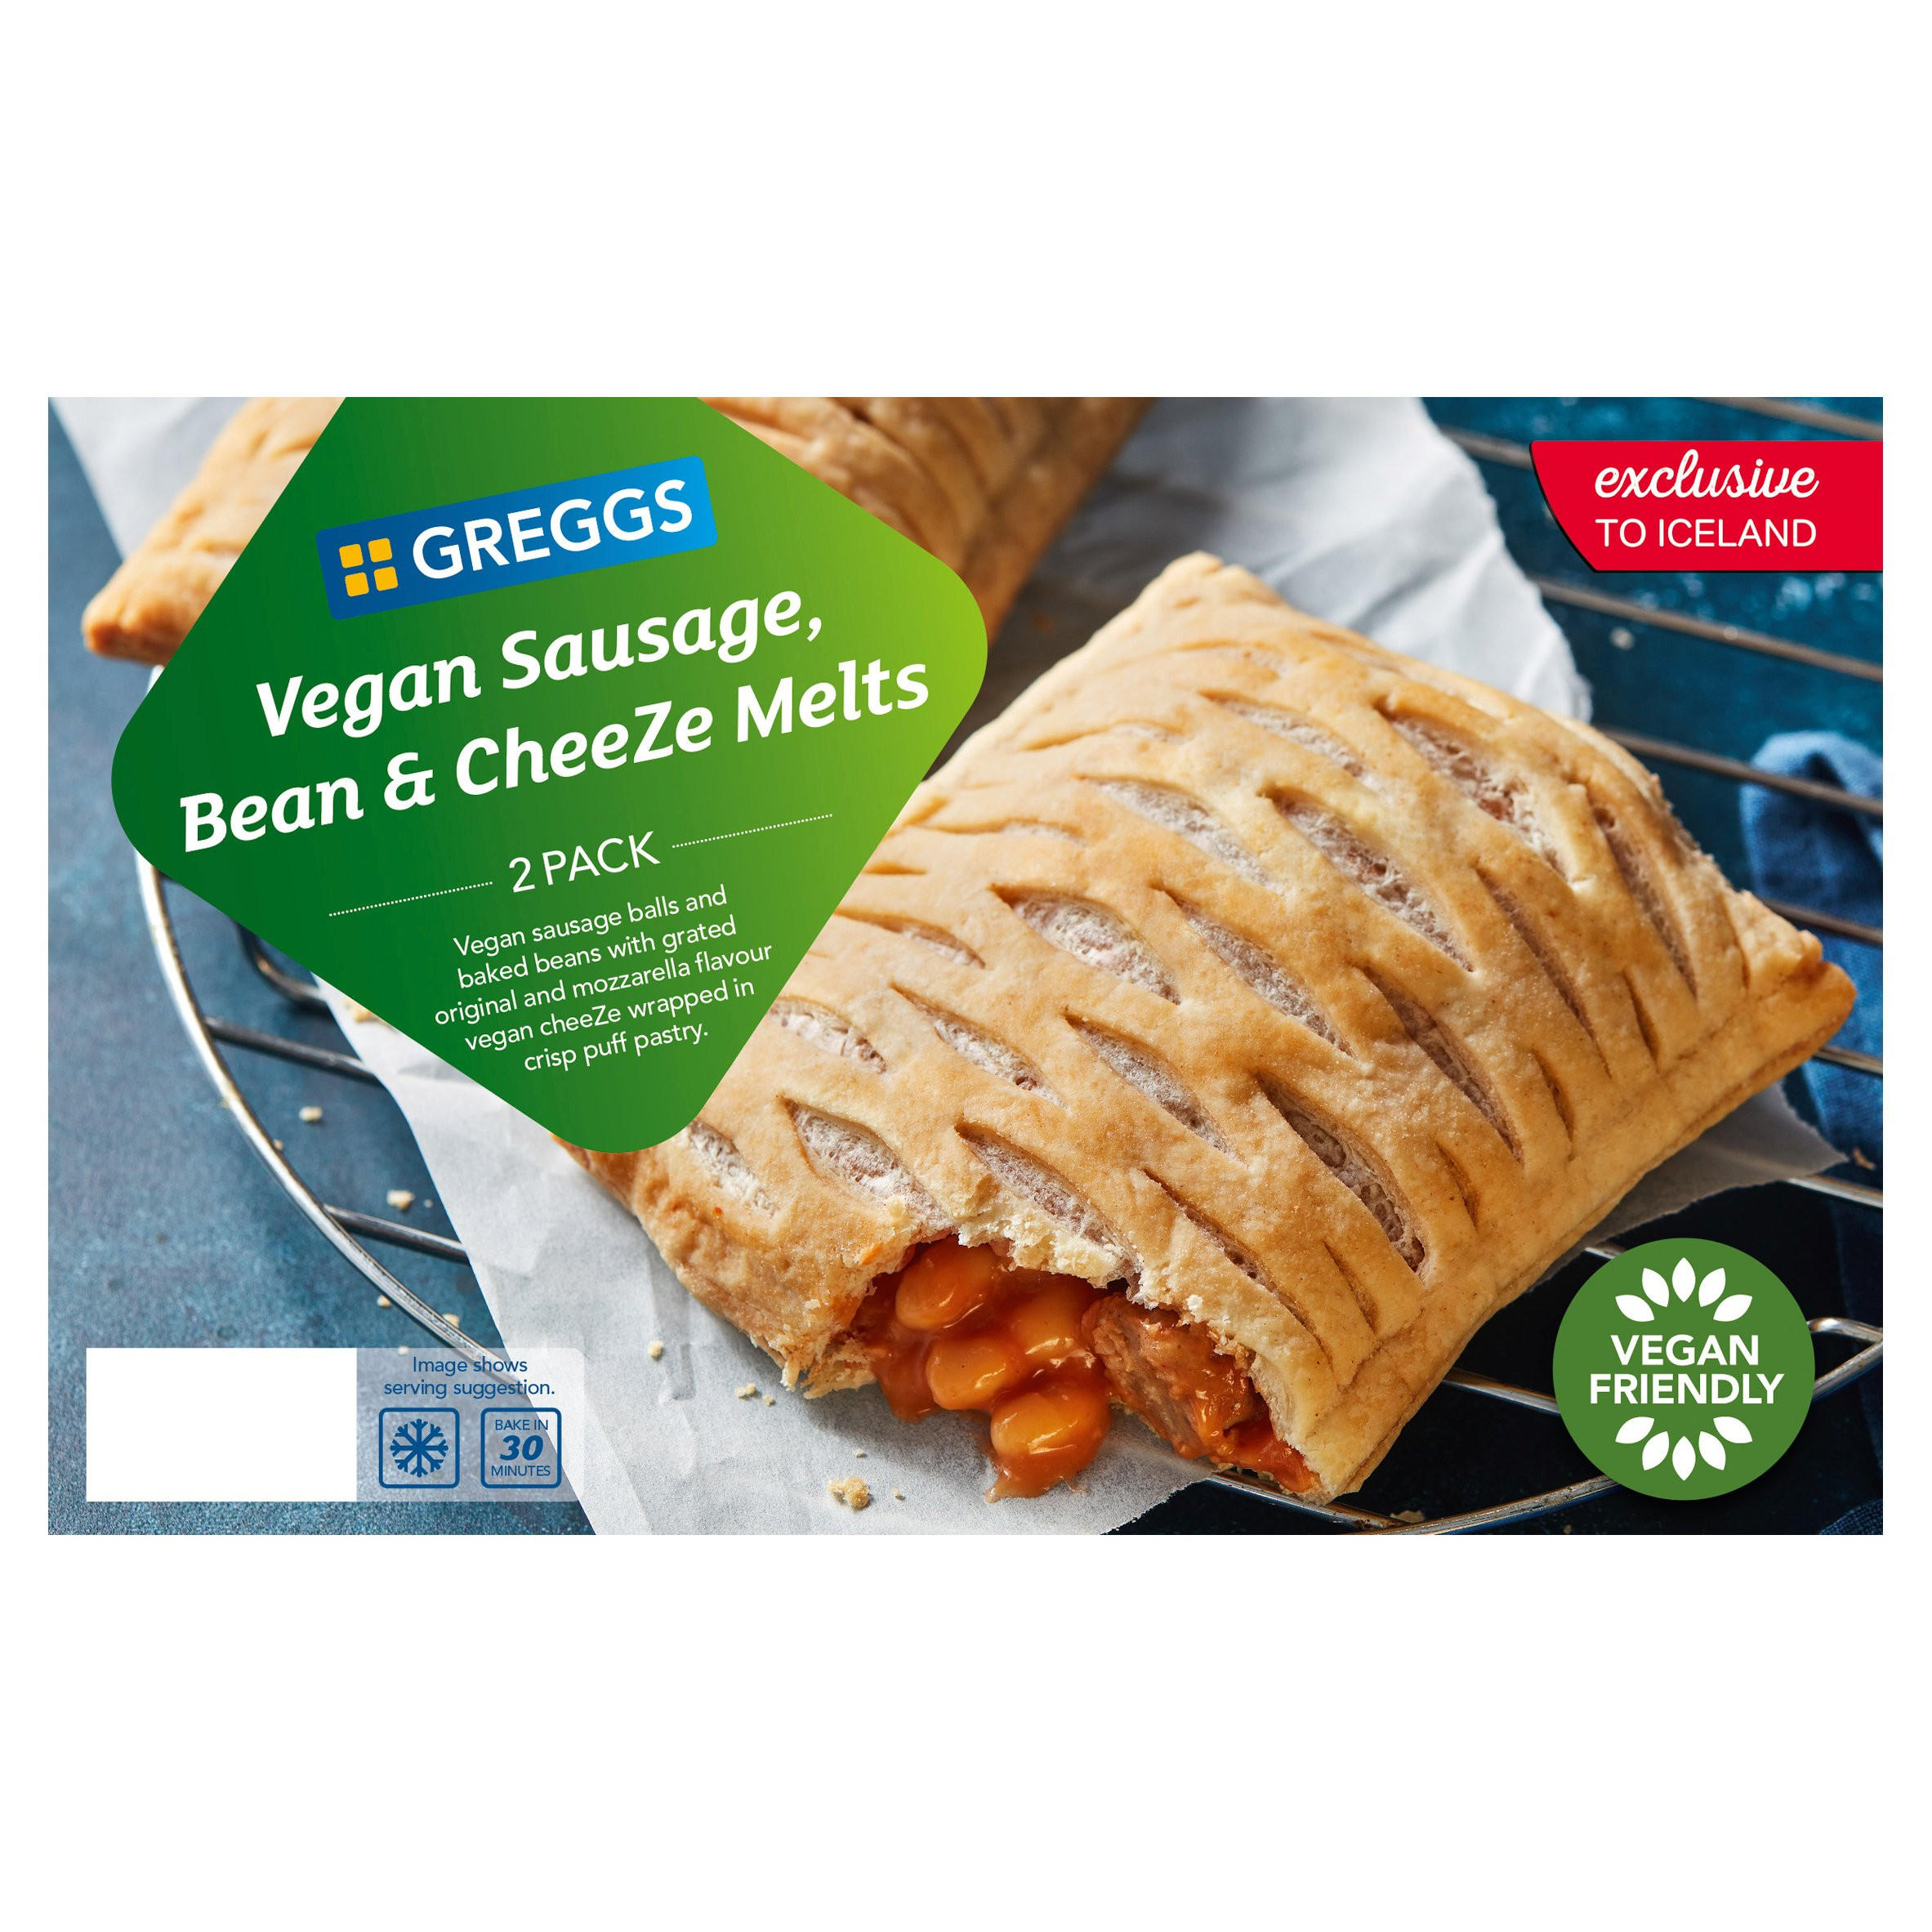 You can still buy Greggs sausage rolls and bakes from Iceland